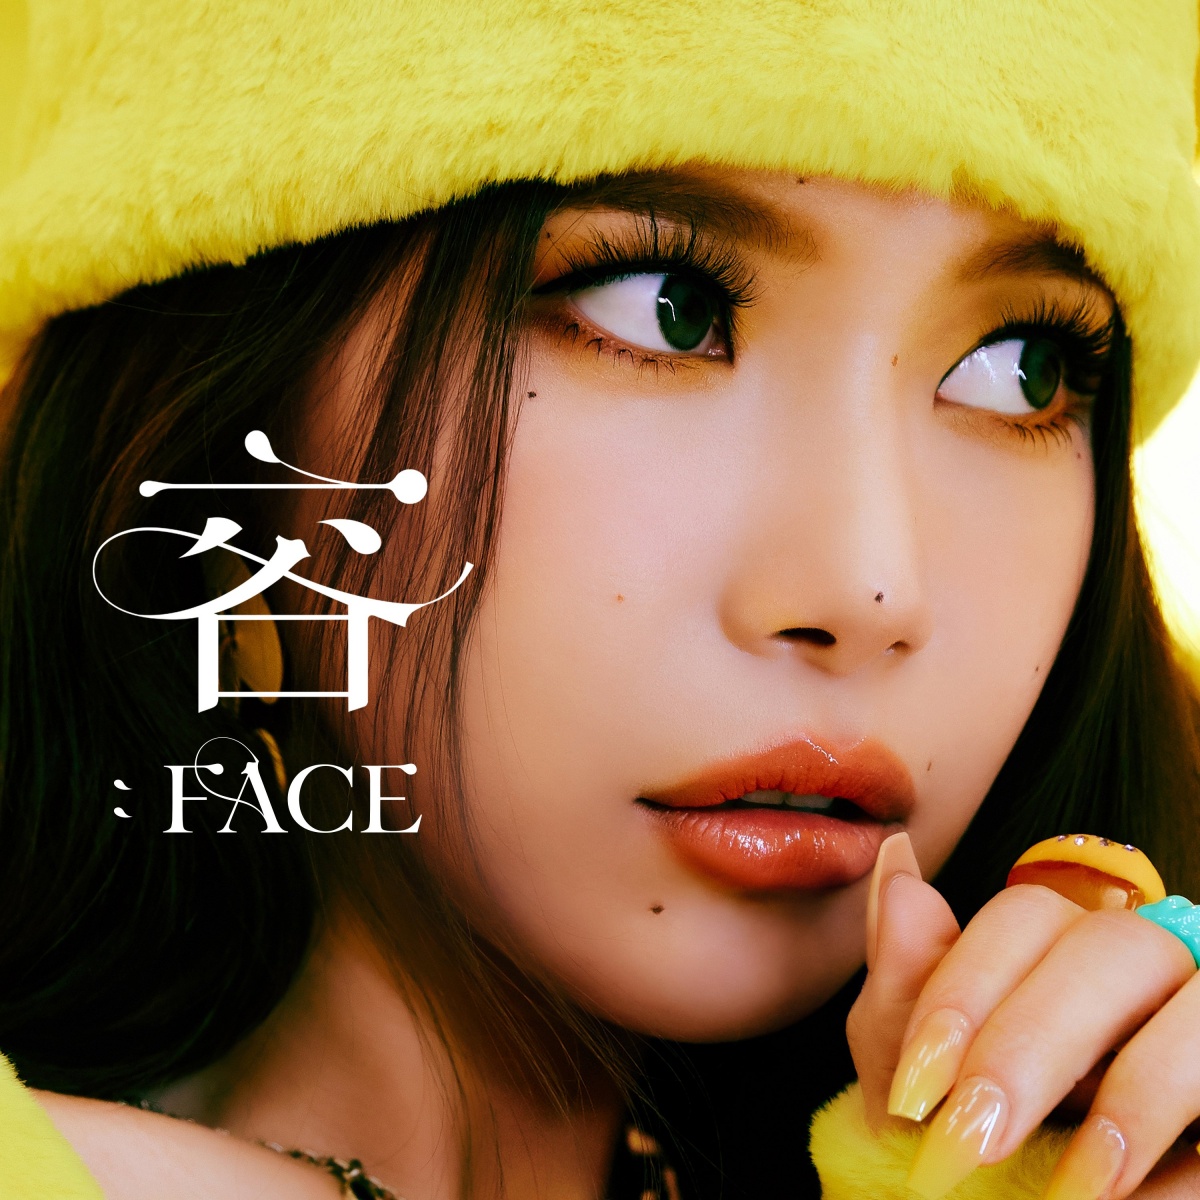 Solar, '容: FACE' Highlight Medley Released... High-quality 'Honey Voice' notice